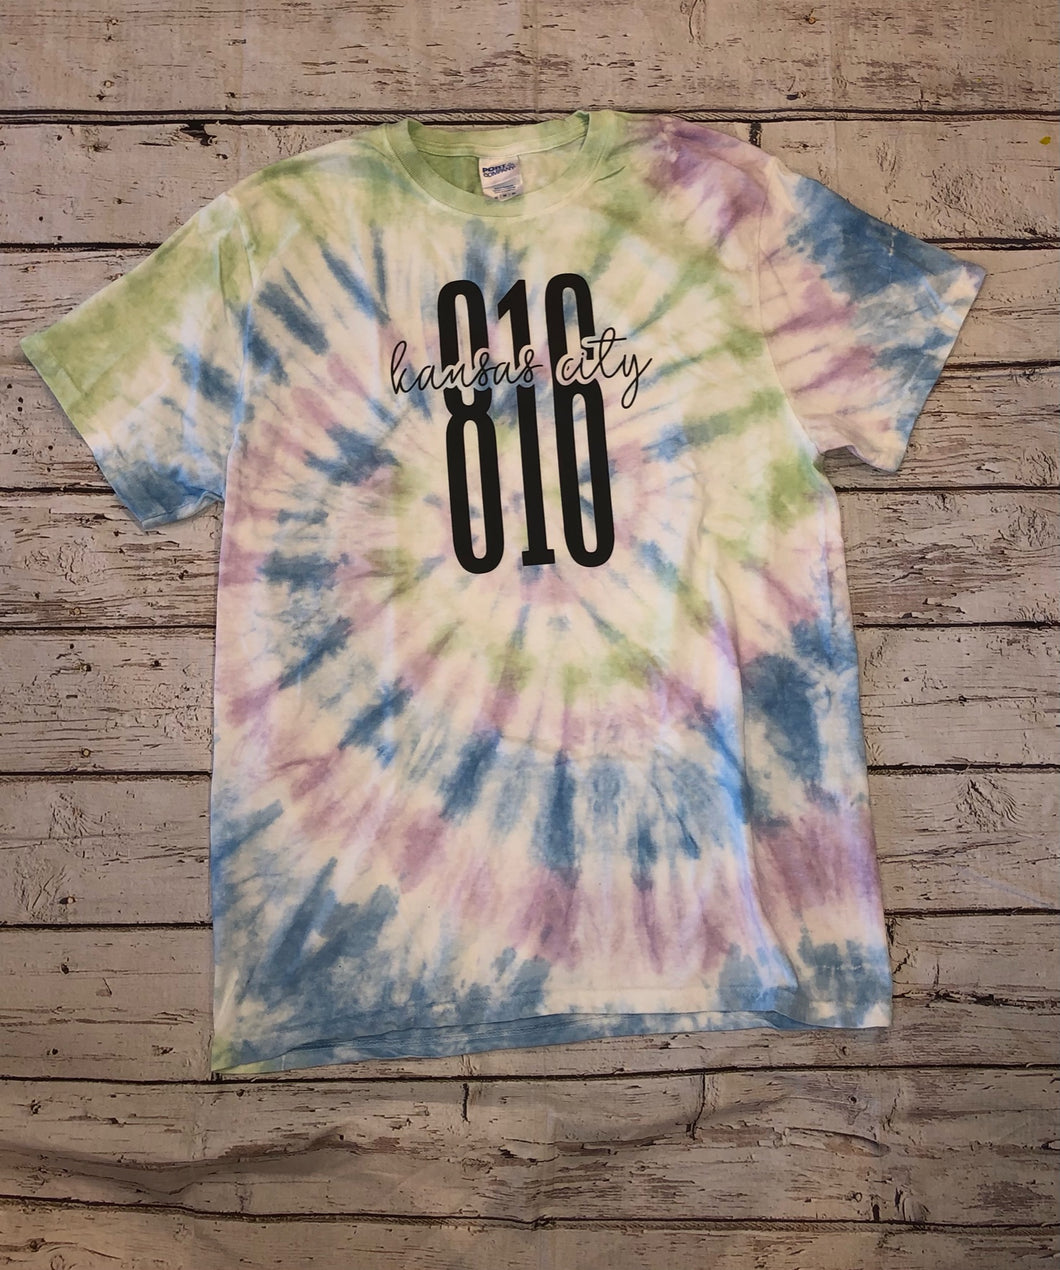 Watercolor spiral Tie Dye tee with 816 Kansas City